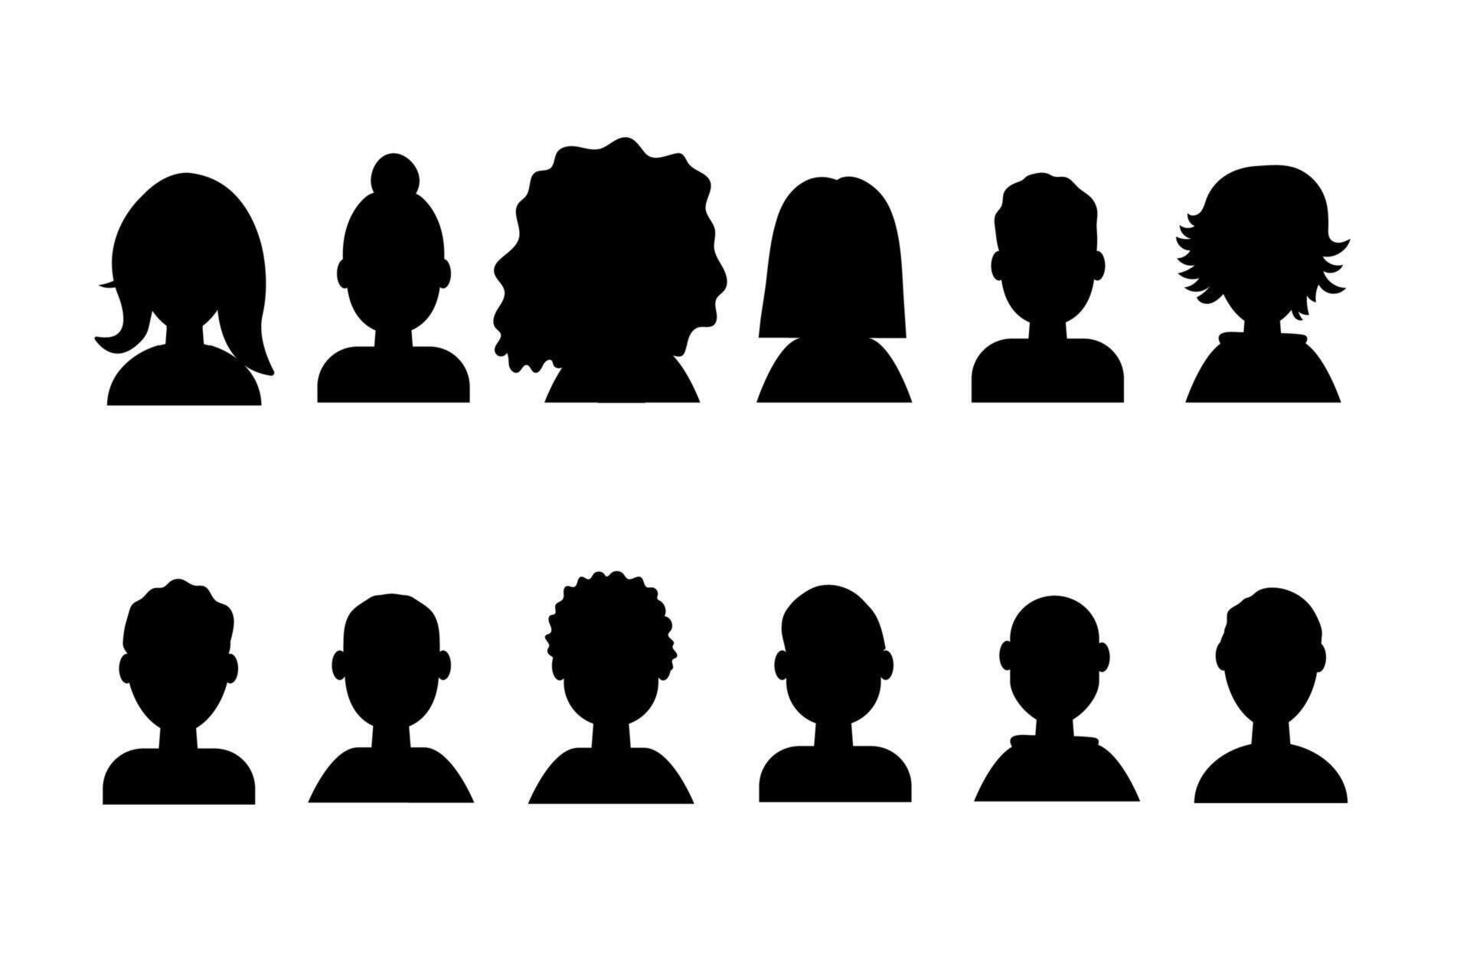 A set of female and male icons, avatars. Silhouette of women and men with different hairstyles. In silhouette style. vector